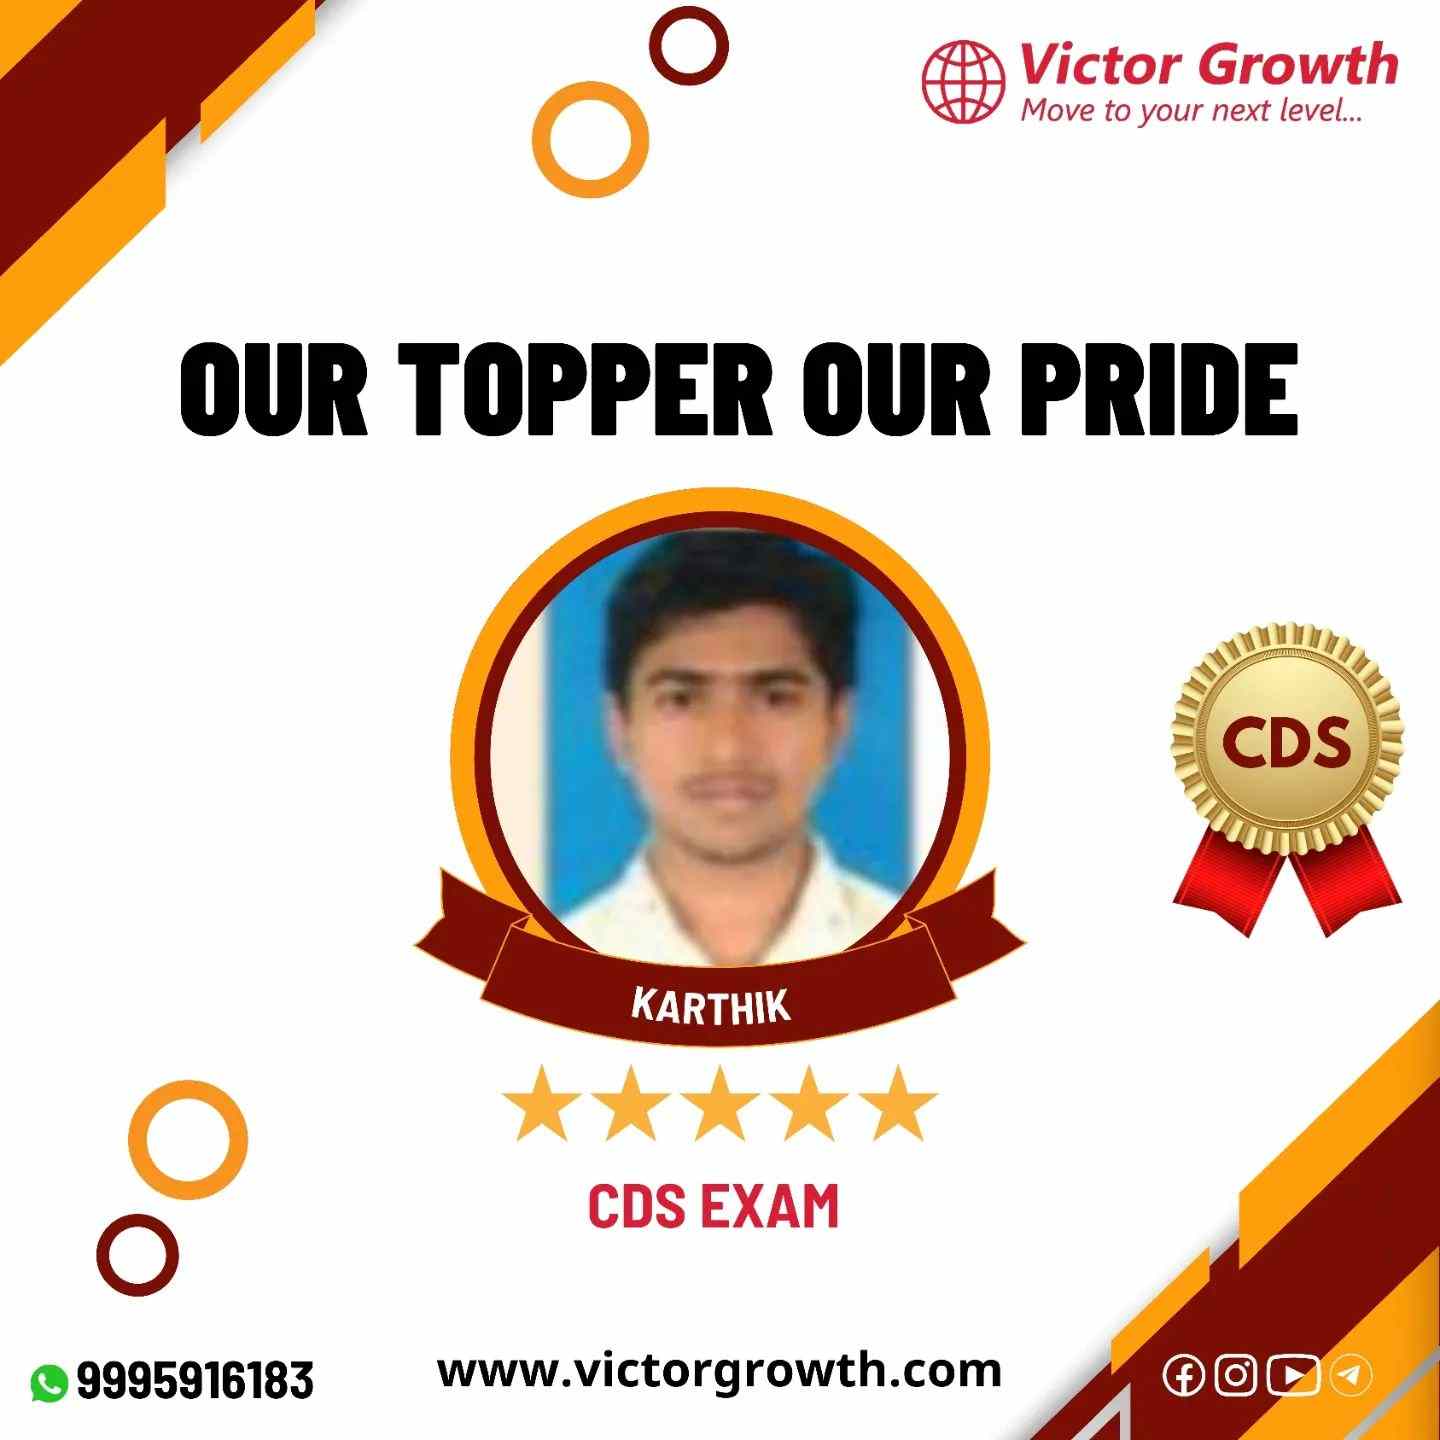 Victor Growth IAS Academy Kochi Topper Student 1 Photo